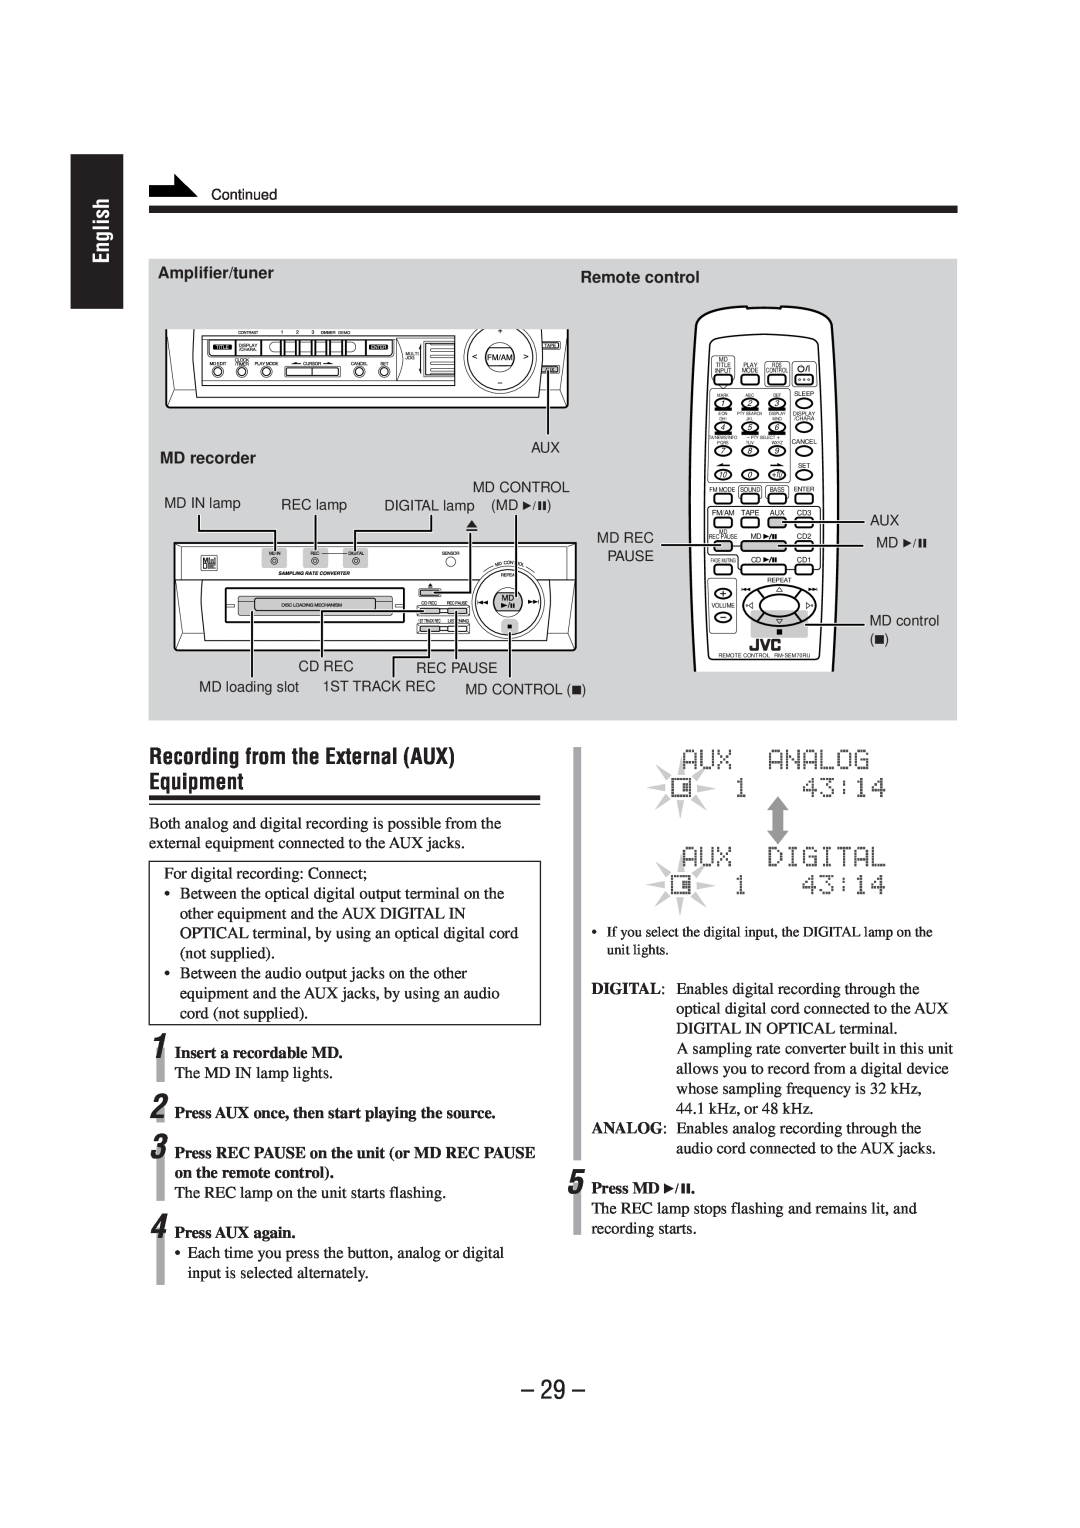 JVC CA-MD70R manual Recording from the External AUX Equipment, English, Amplifier/tuner, Remote control, MD recorder 